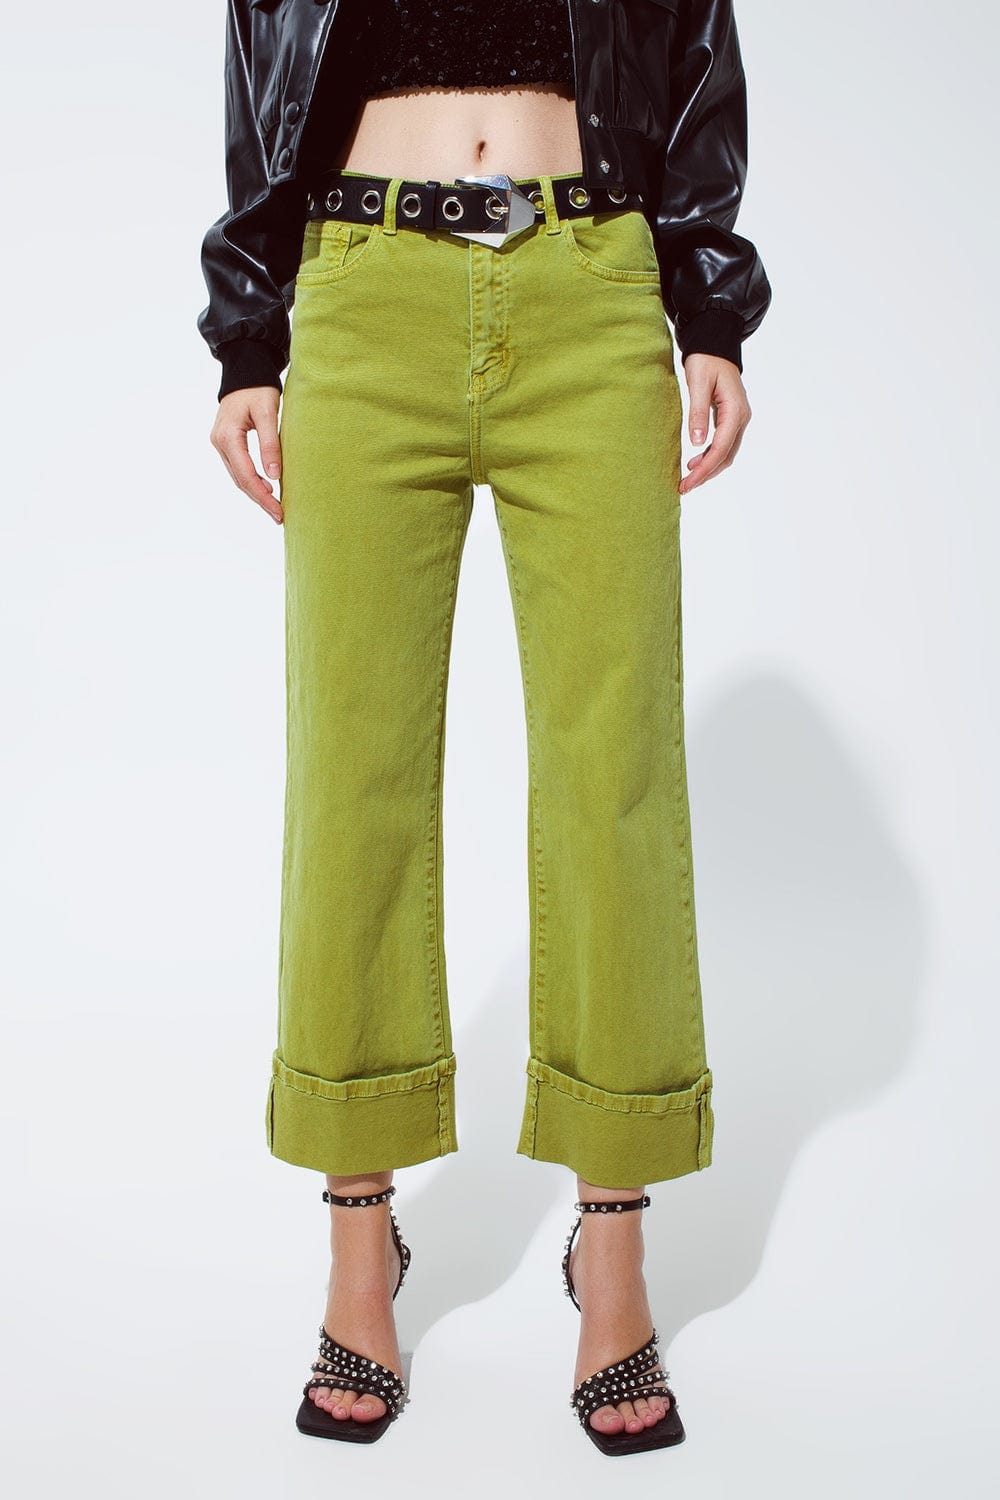 Q2 Women's Jean Straight Leg Jeans With Cropped Hem In Olive Green